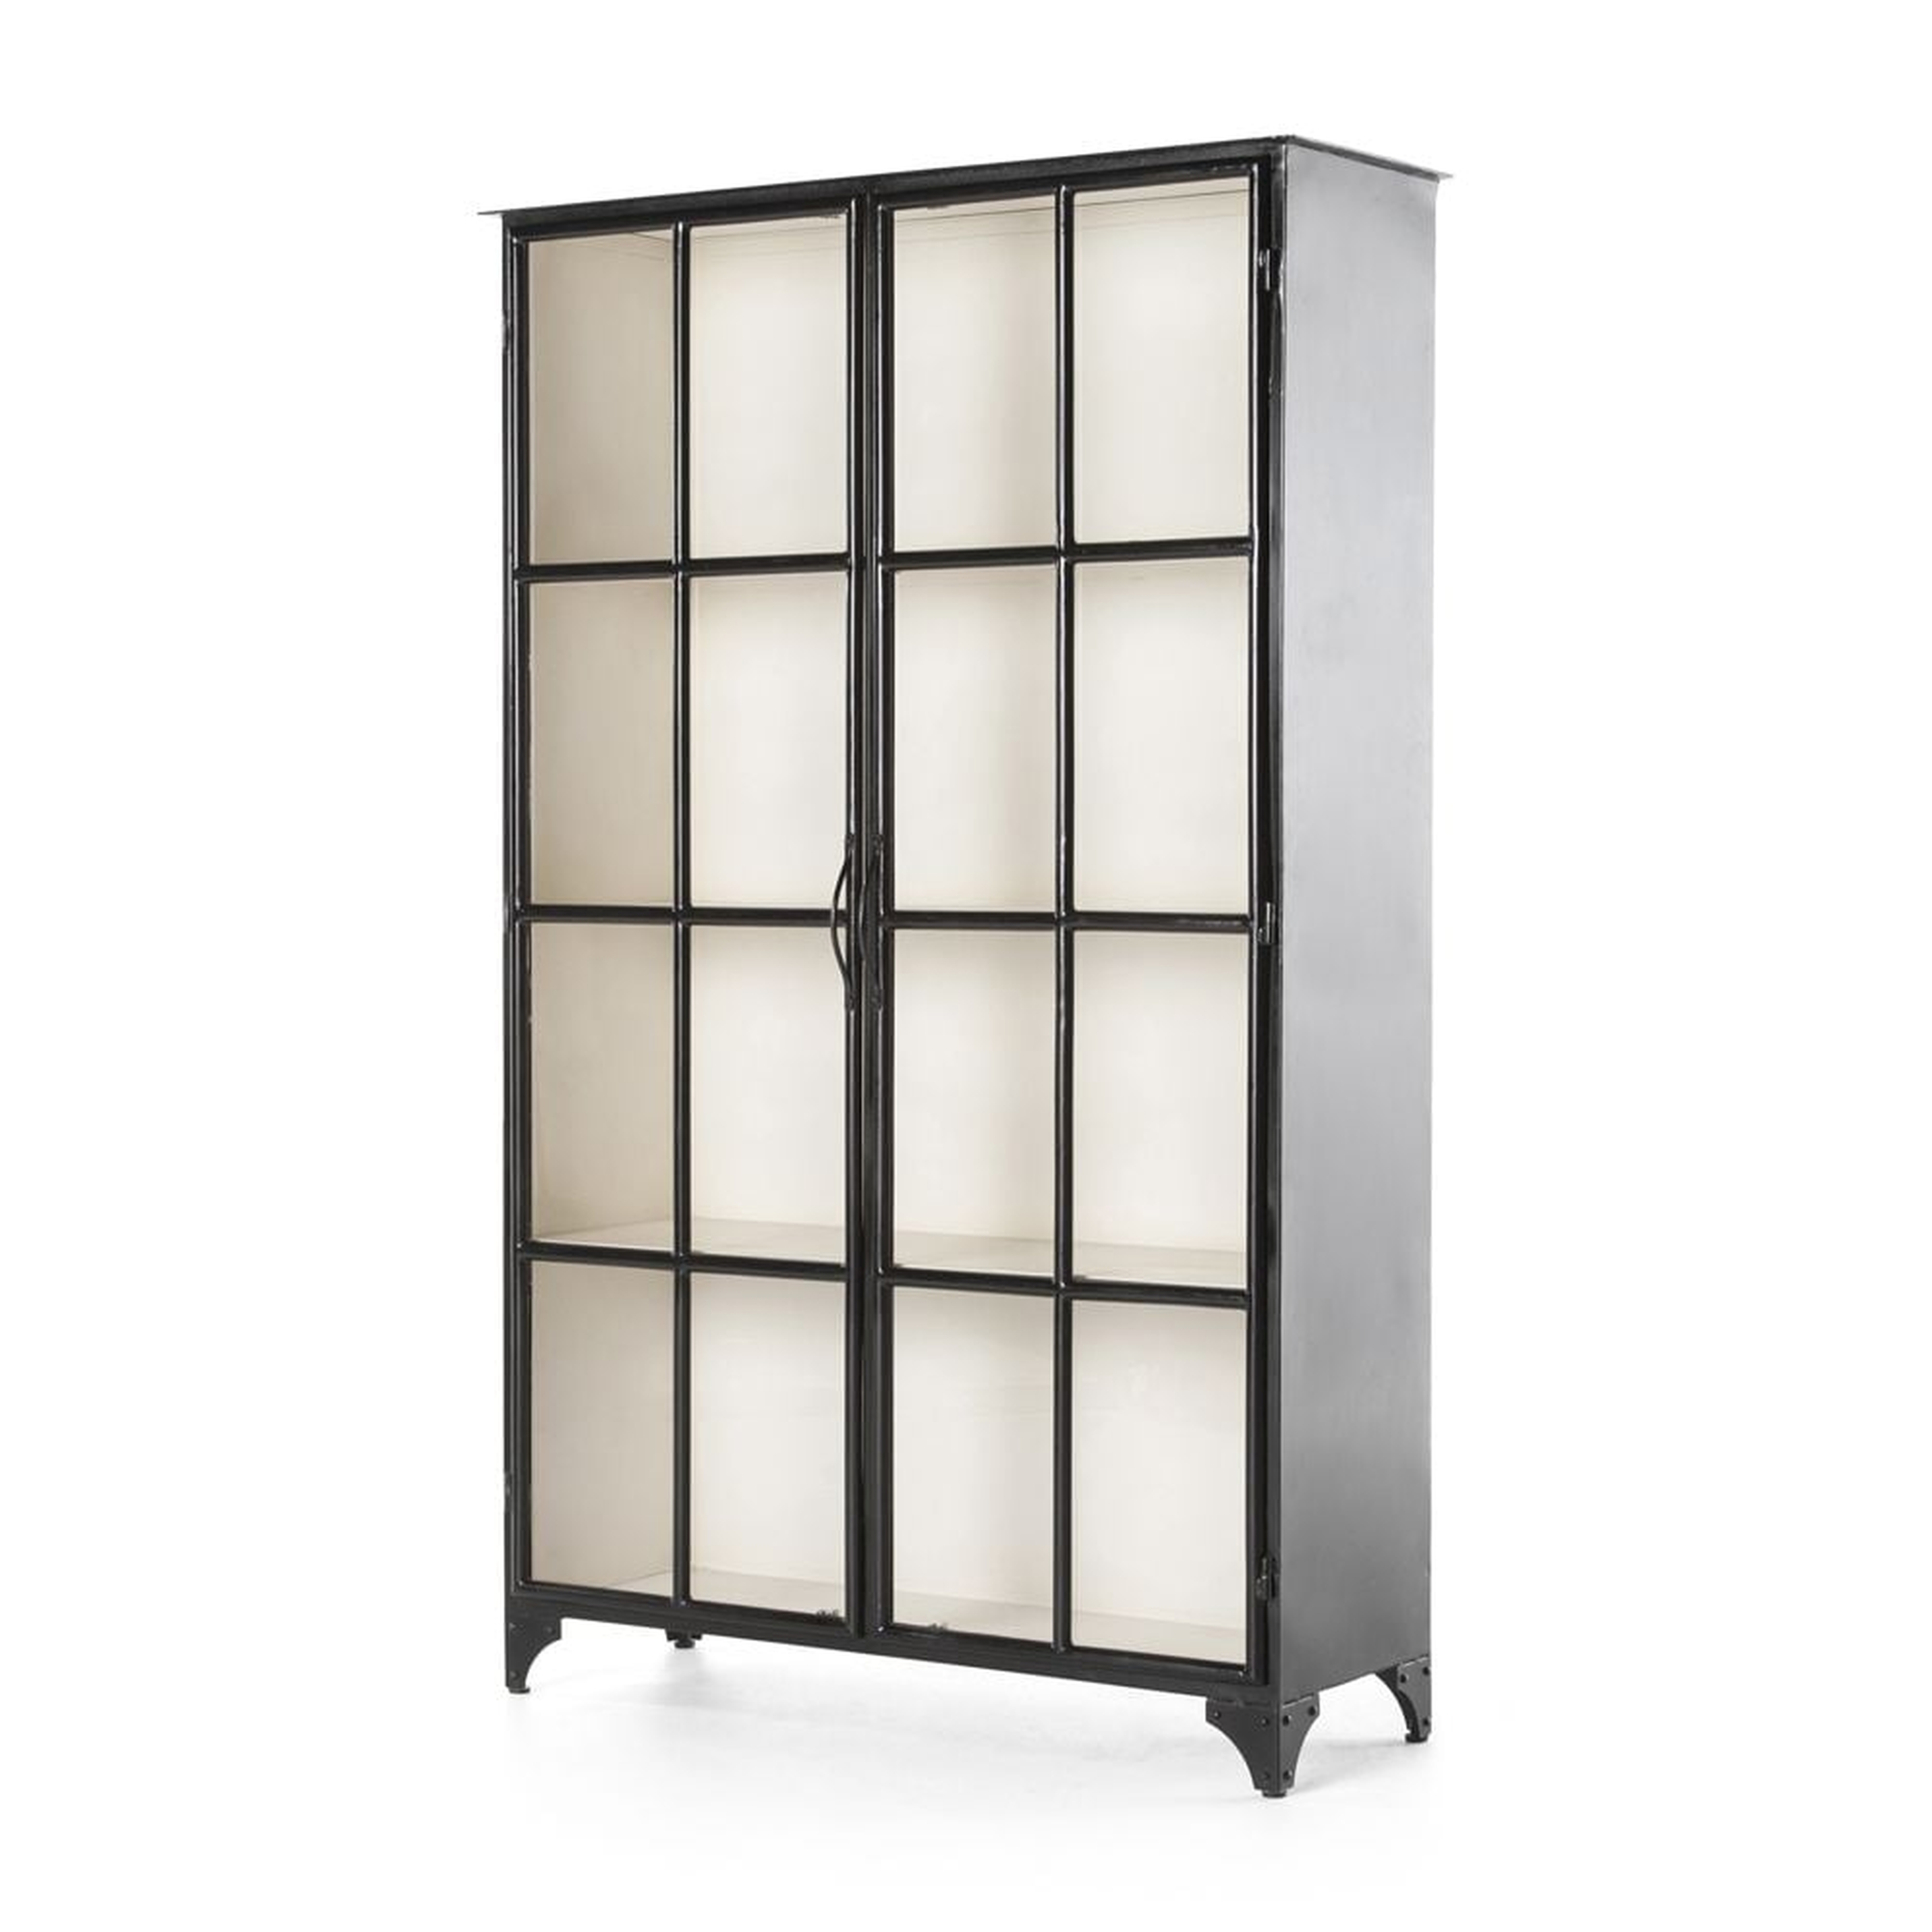 Kedzie Black-and-White Cabinet - Crate and Barrel